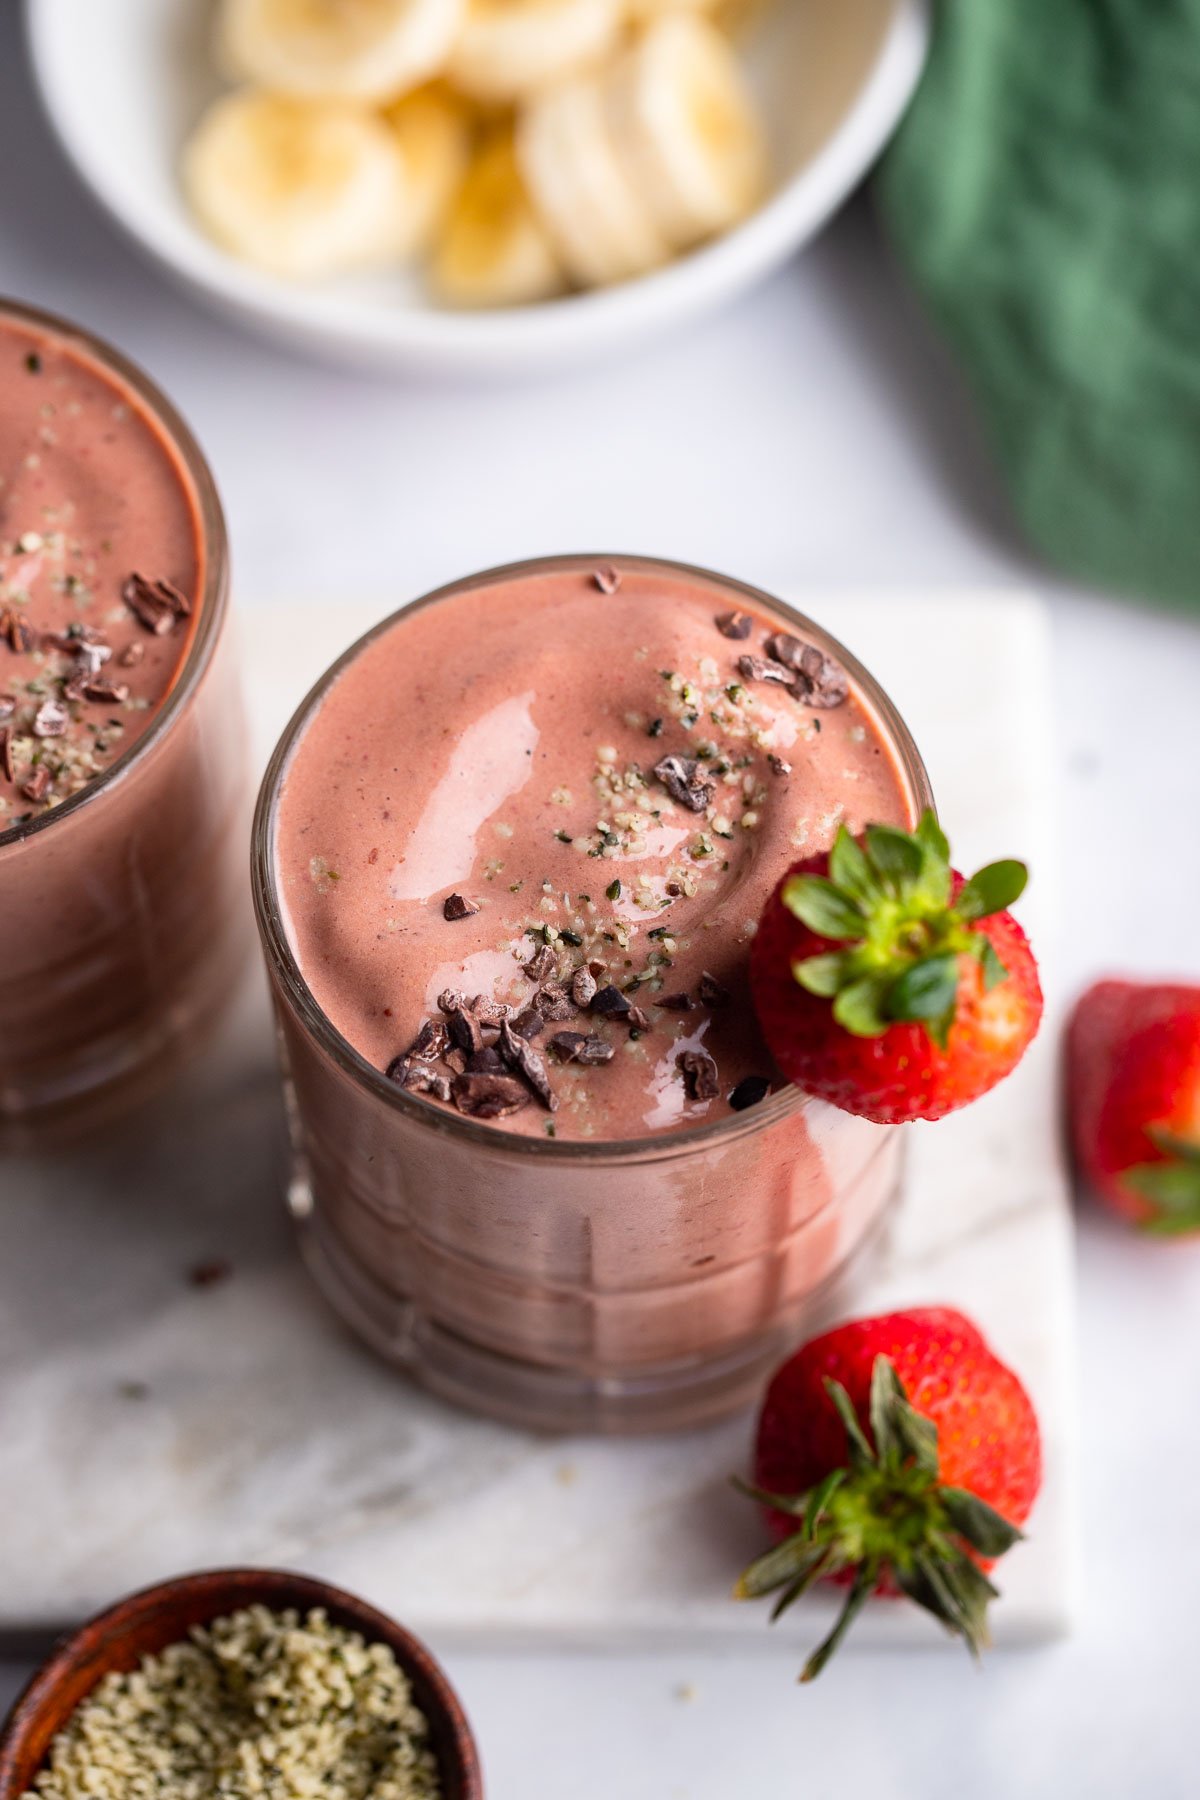 chocolate strawberry banana smoothie garnished with hemp hearts and cacao nibs in a glass.